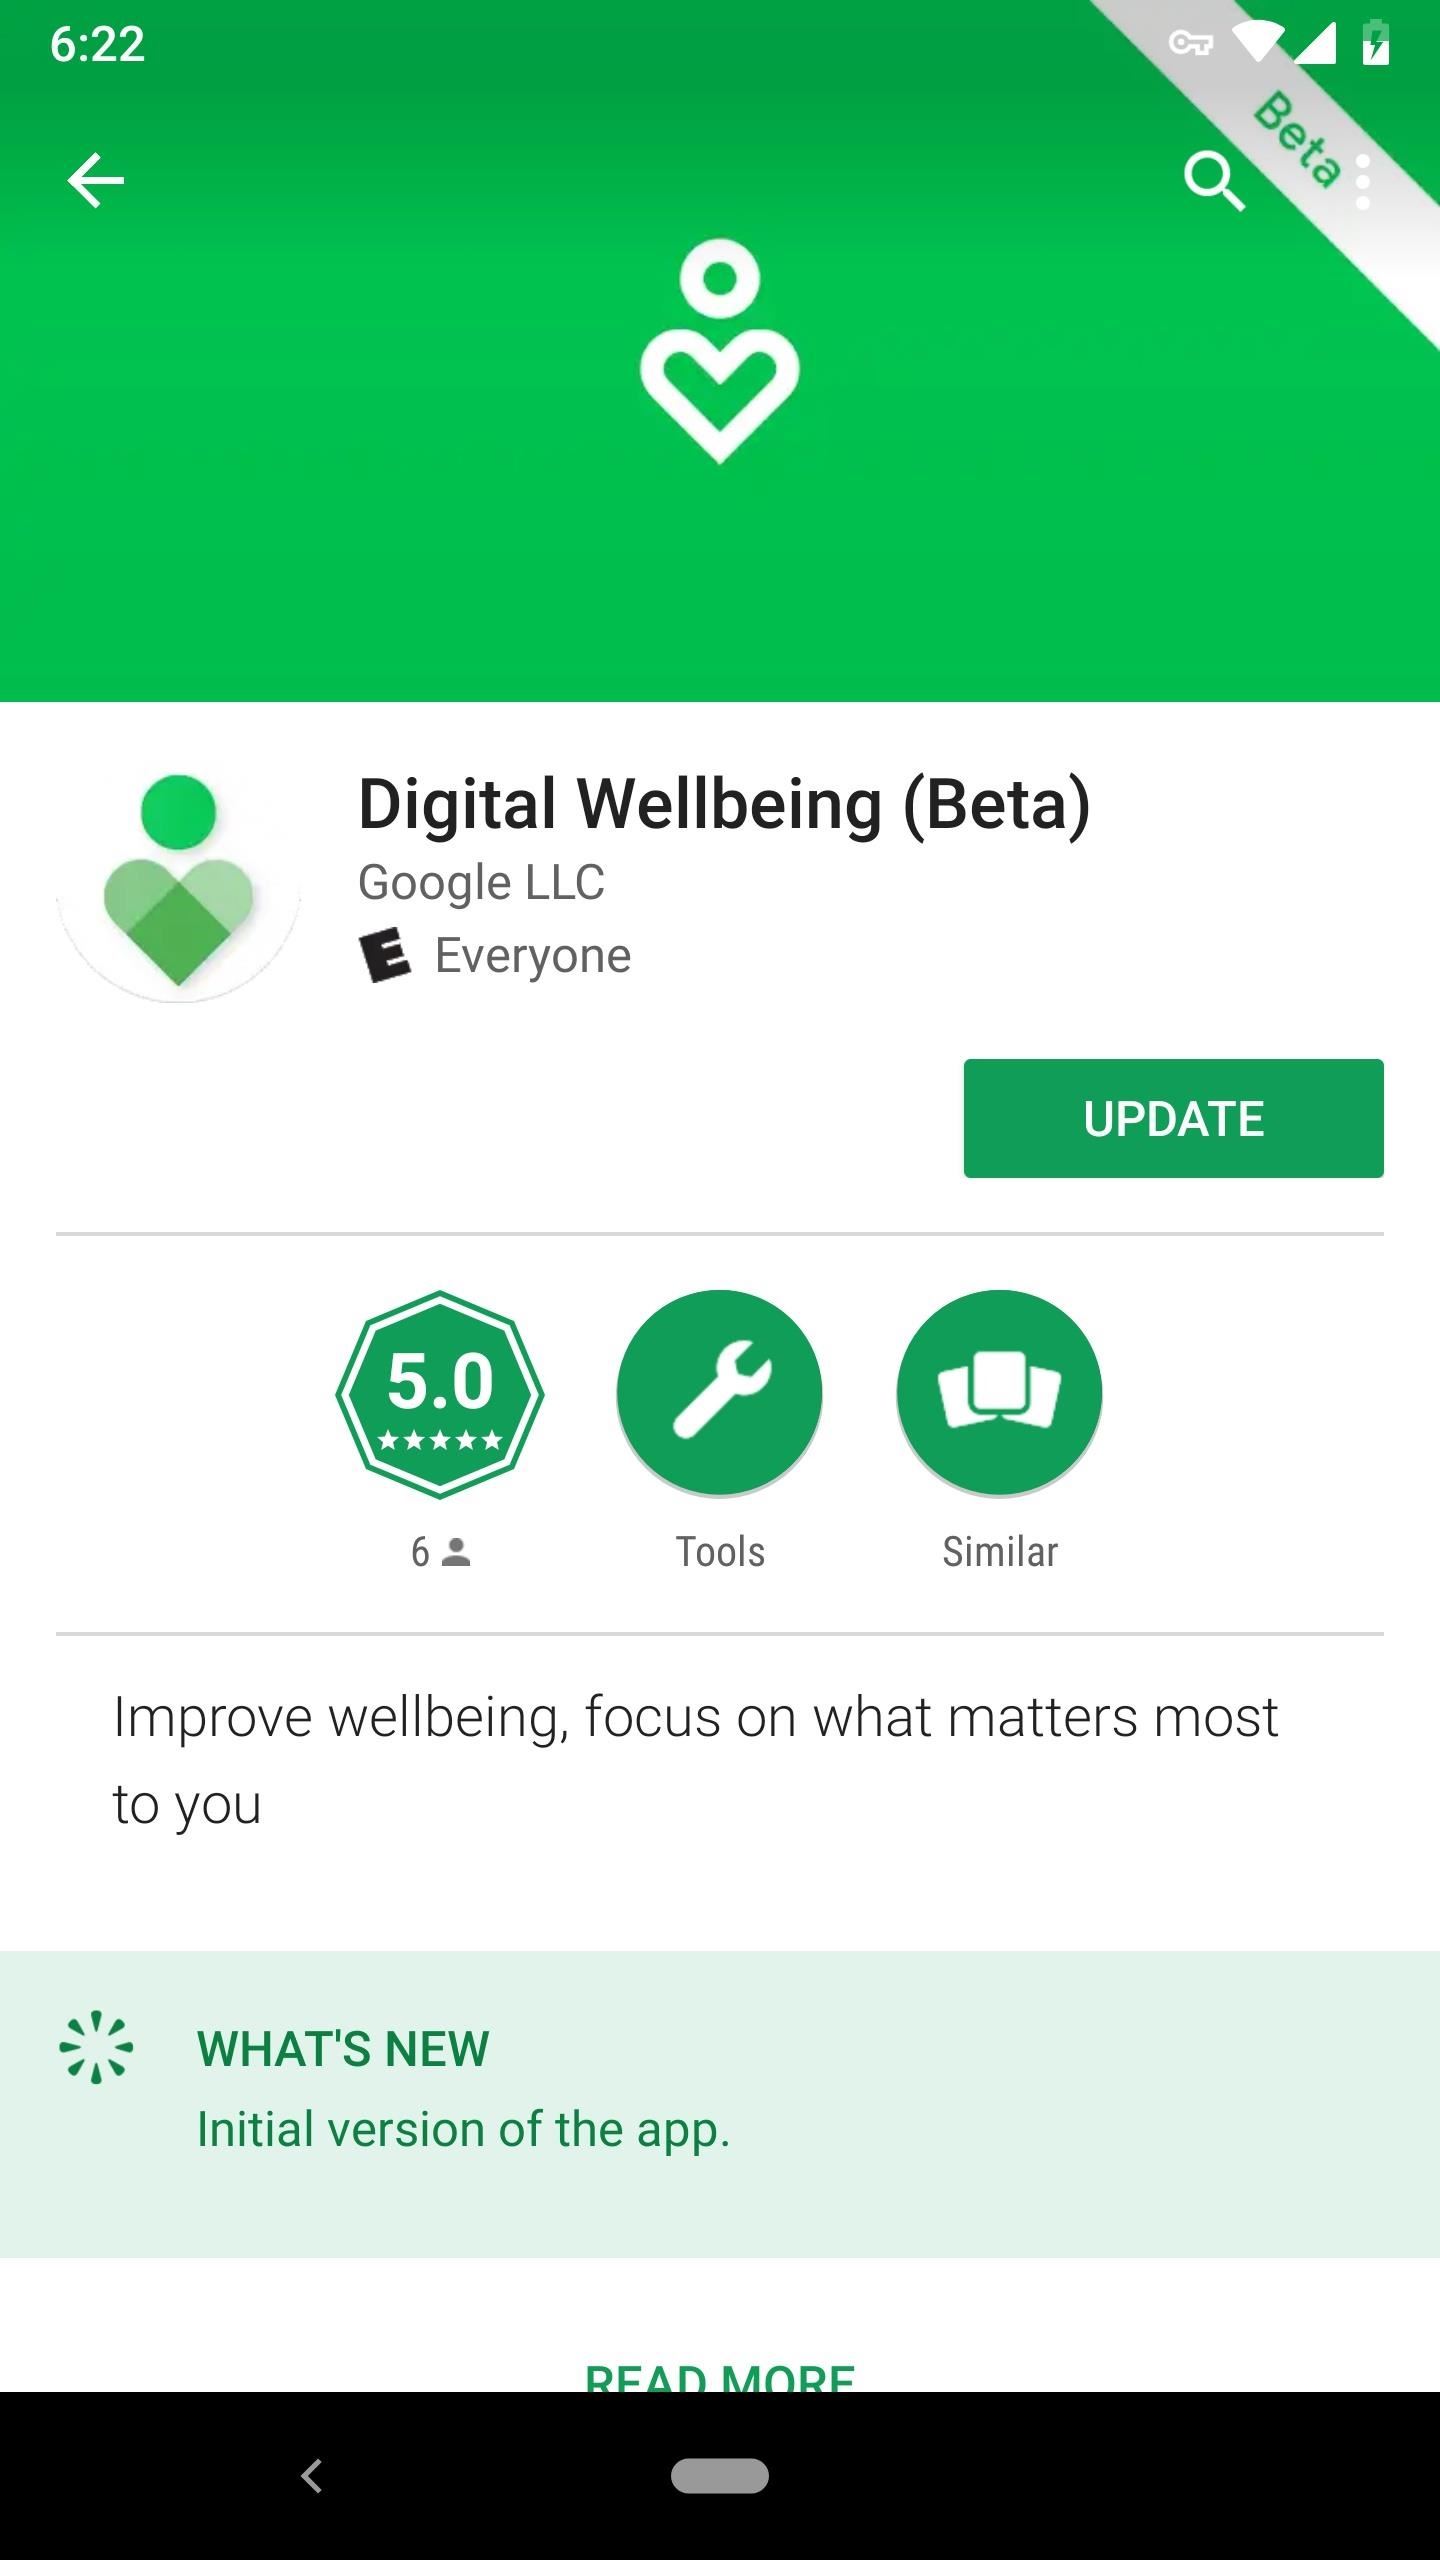 How to Get Digital Wellbeing in Android 9.0 Pie on Your Pixel Right Now